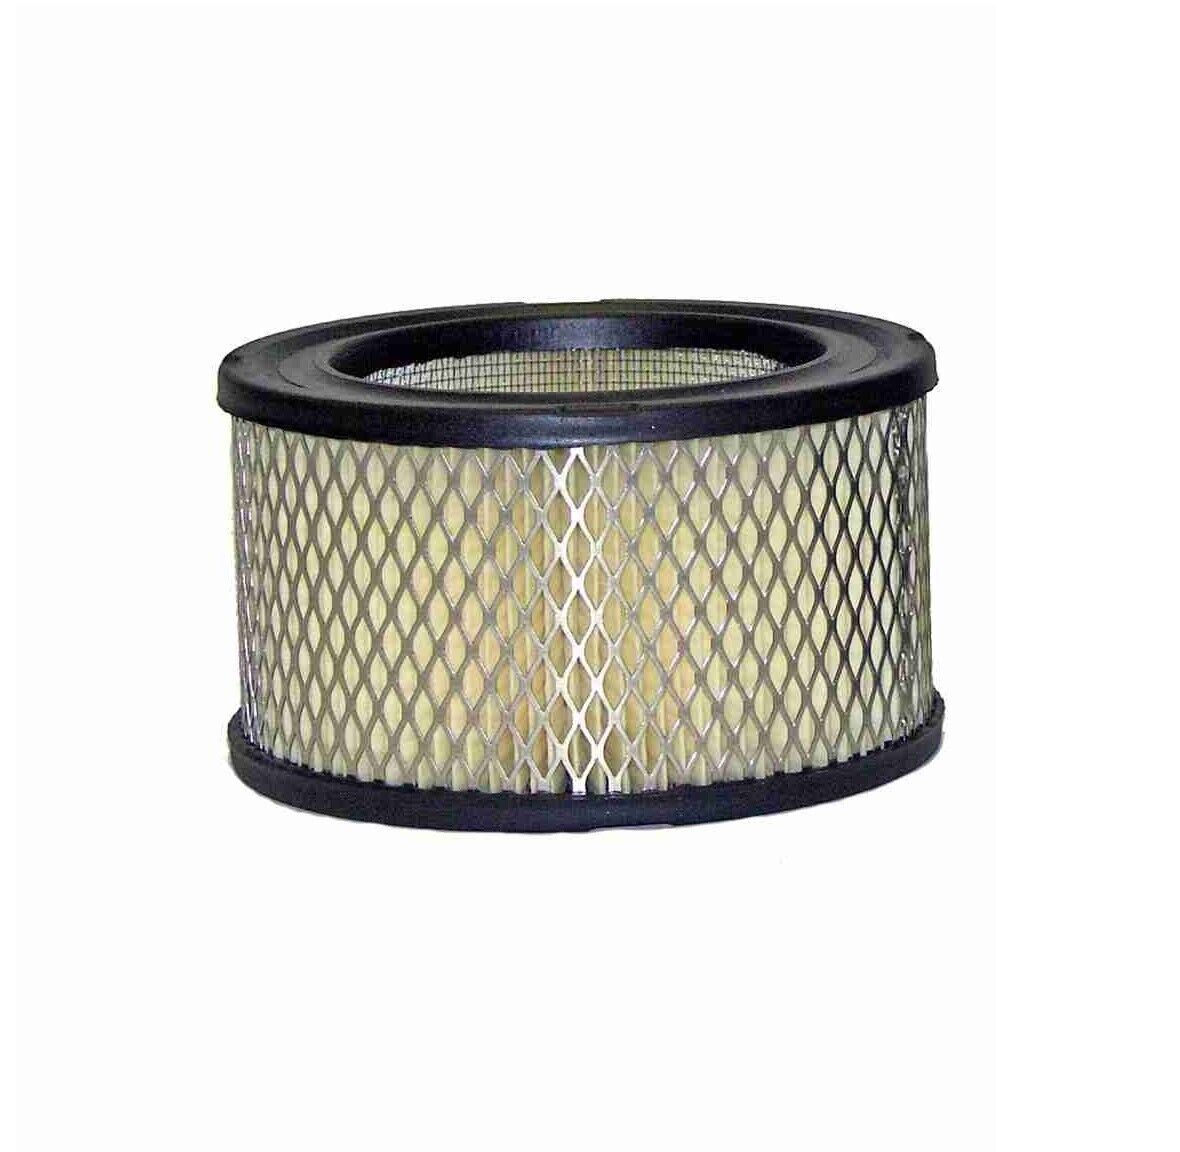 Wix Air Filter for 1961-1964 Chevrolet Corvair Truck